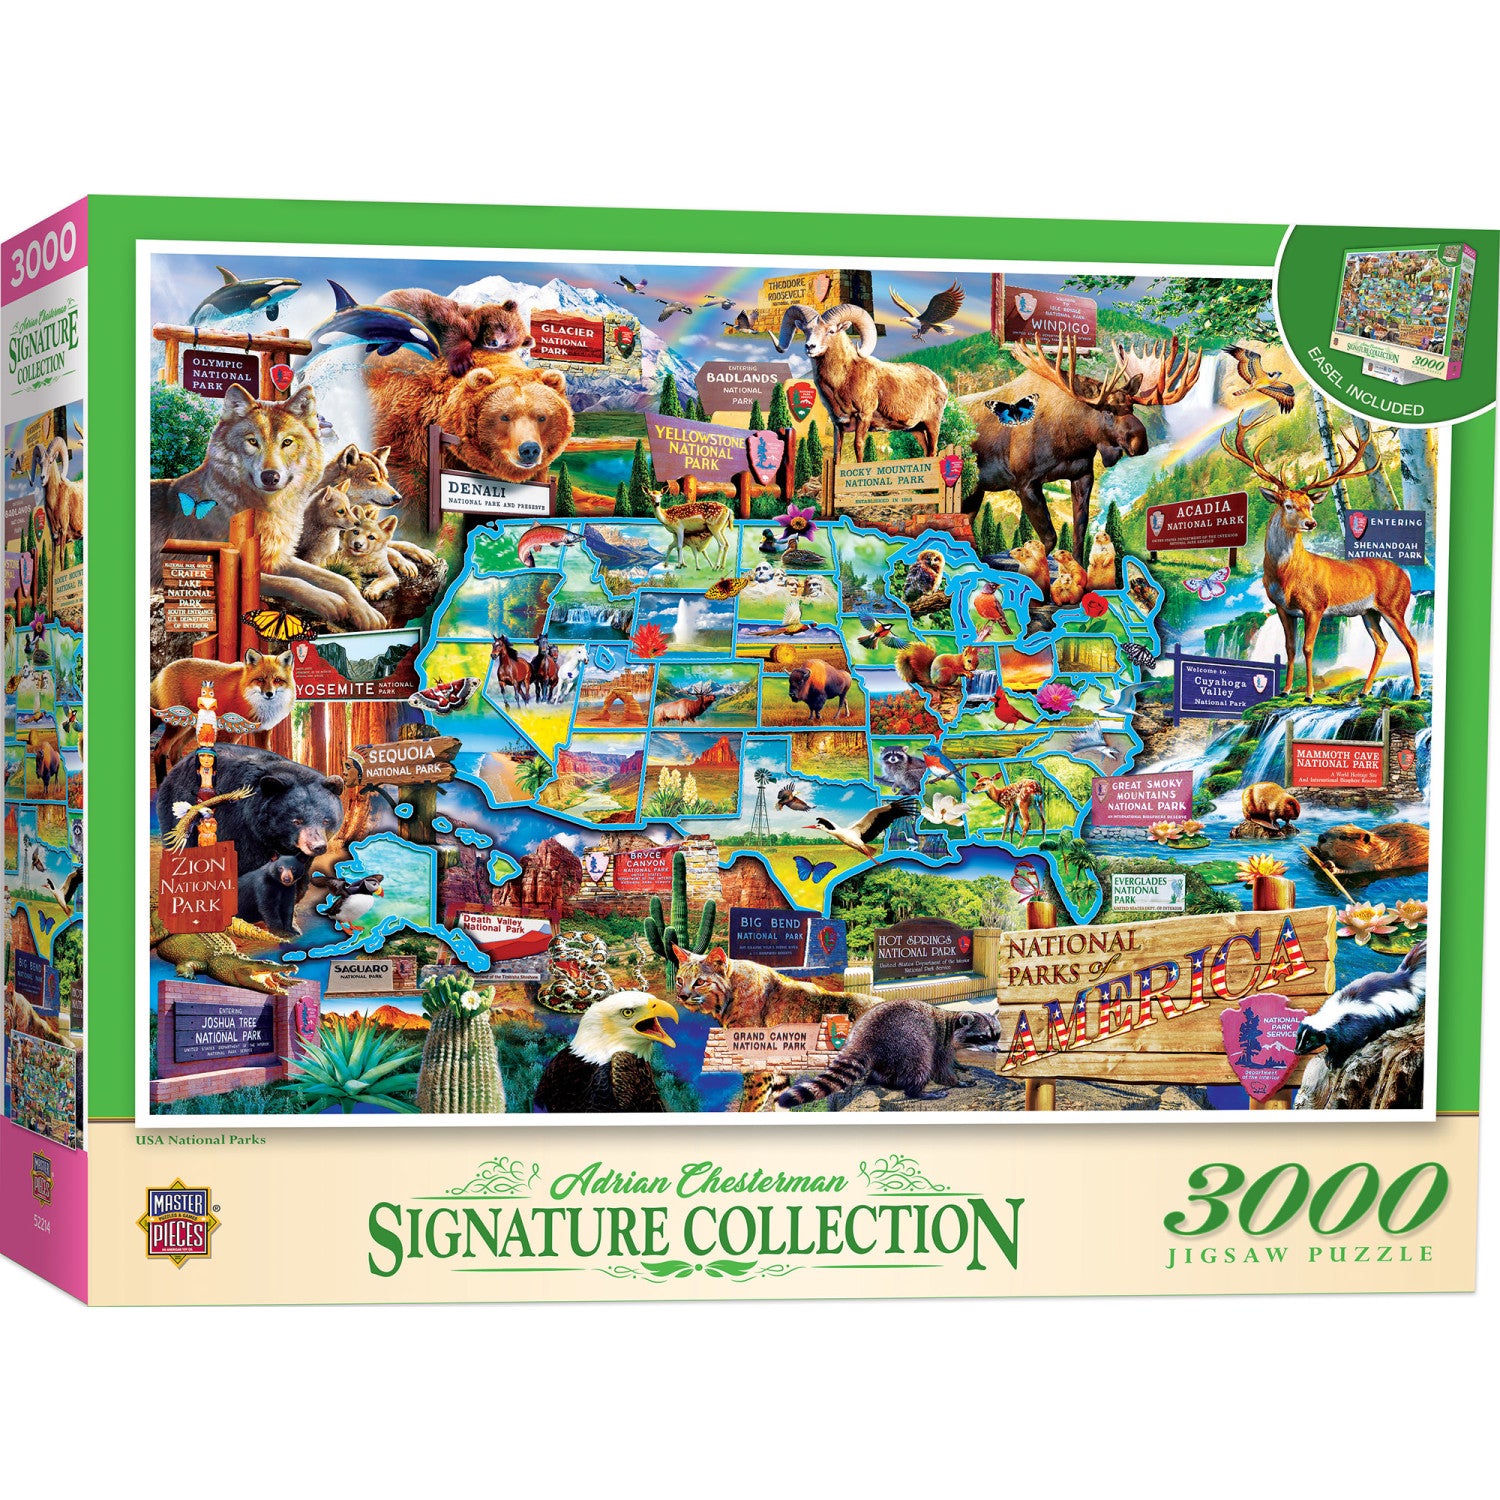 Jigsaw Puzzle Bundle Sets - Great Savings! – All Jigsaw Puzzles US